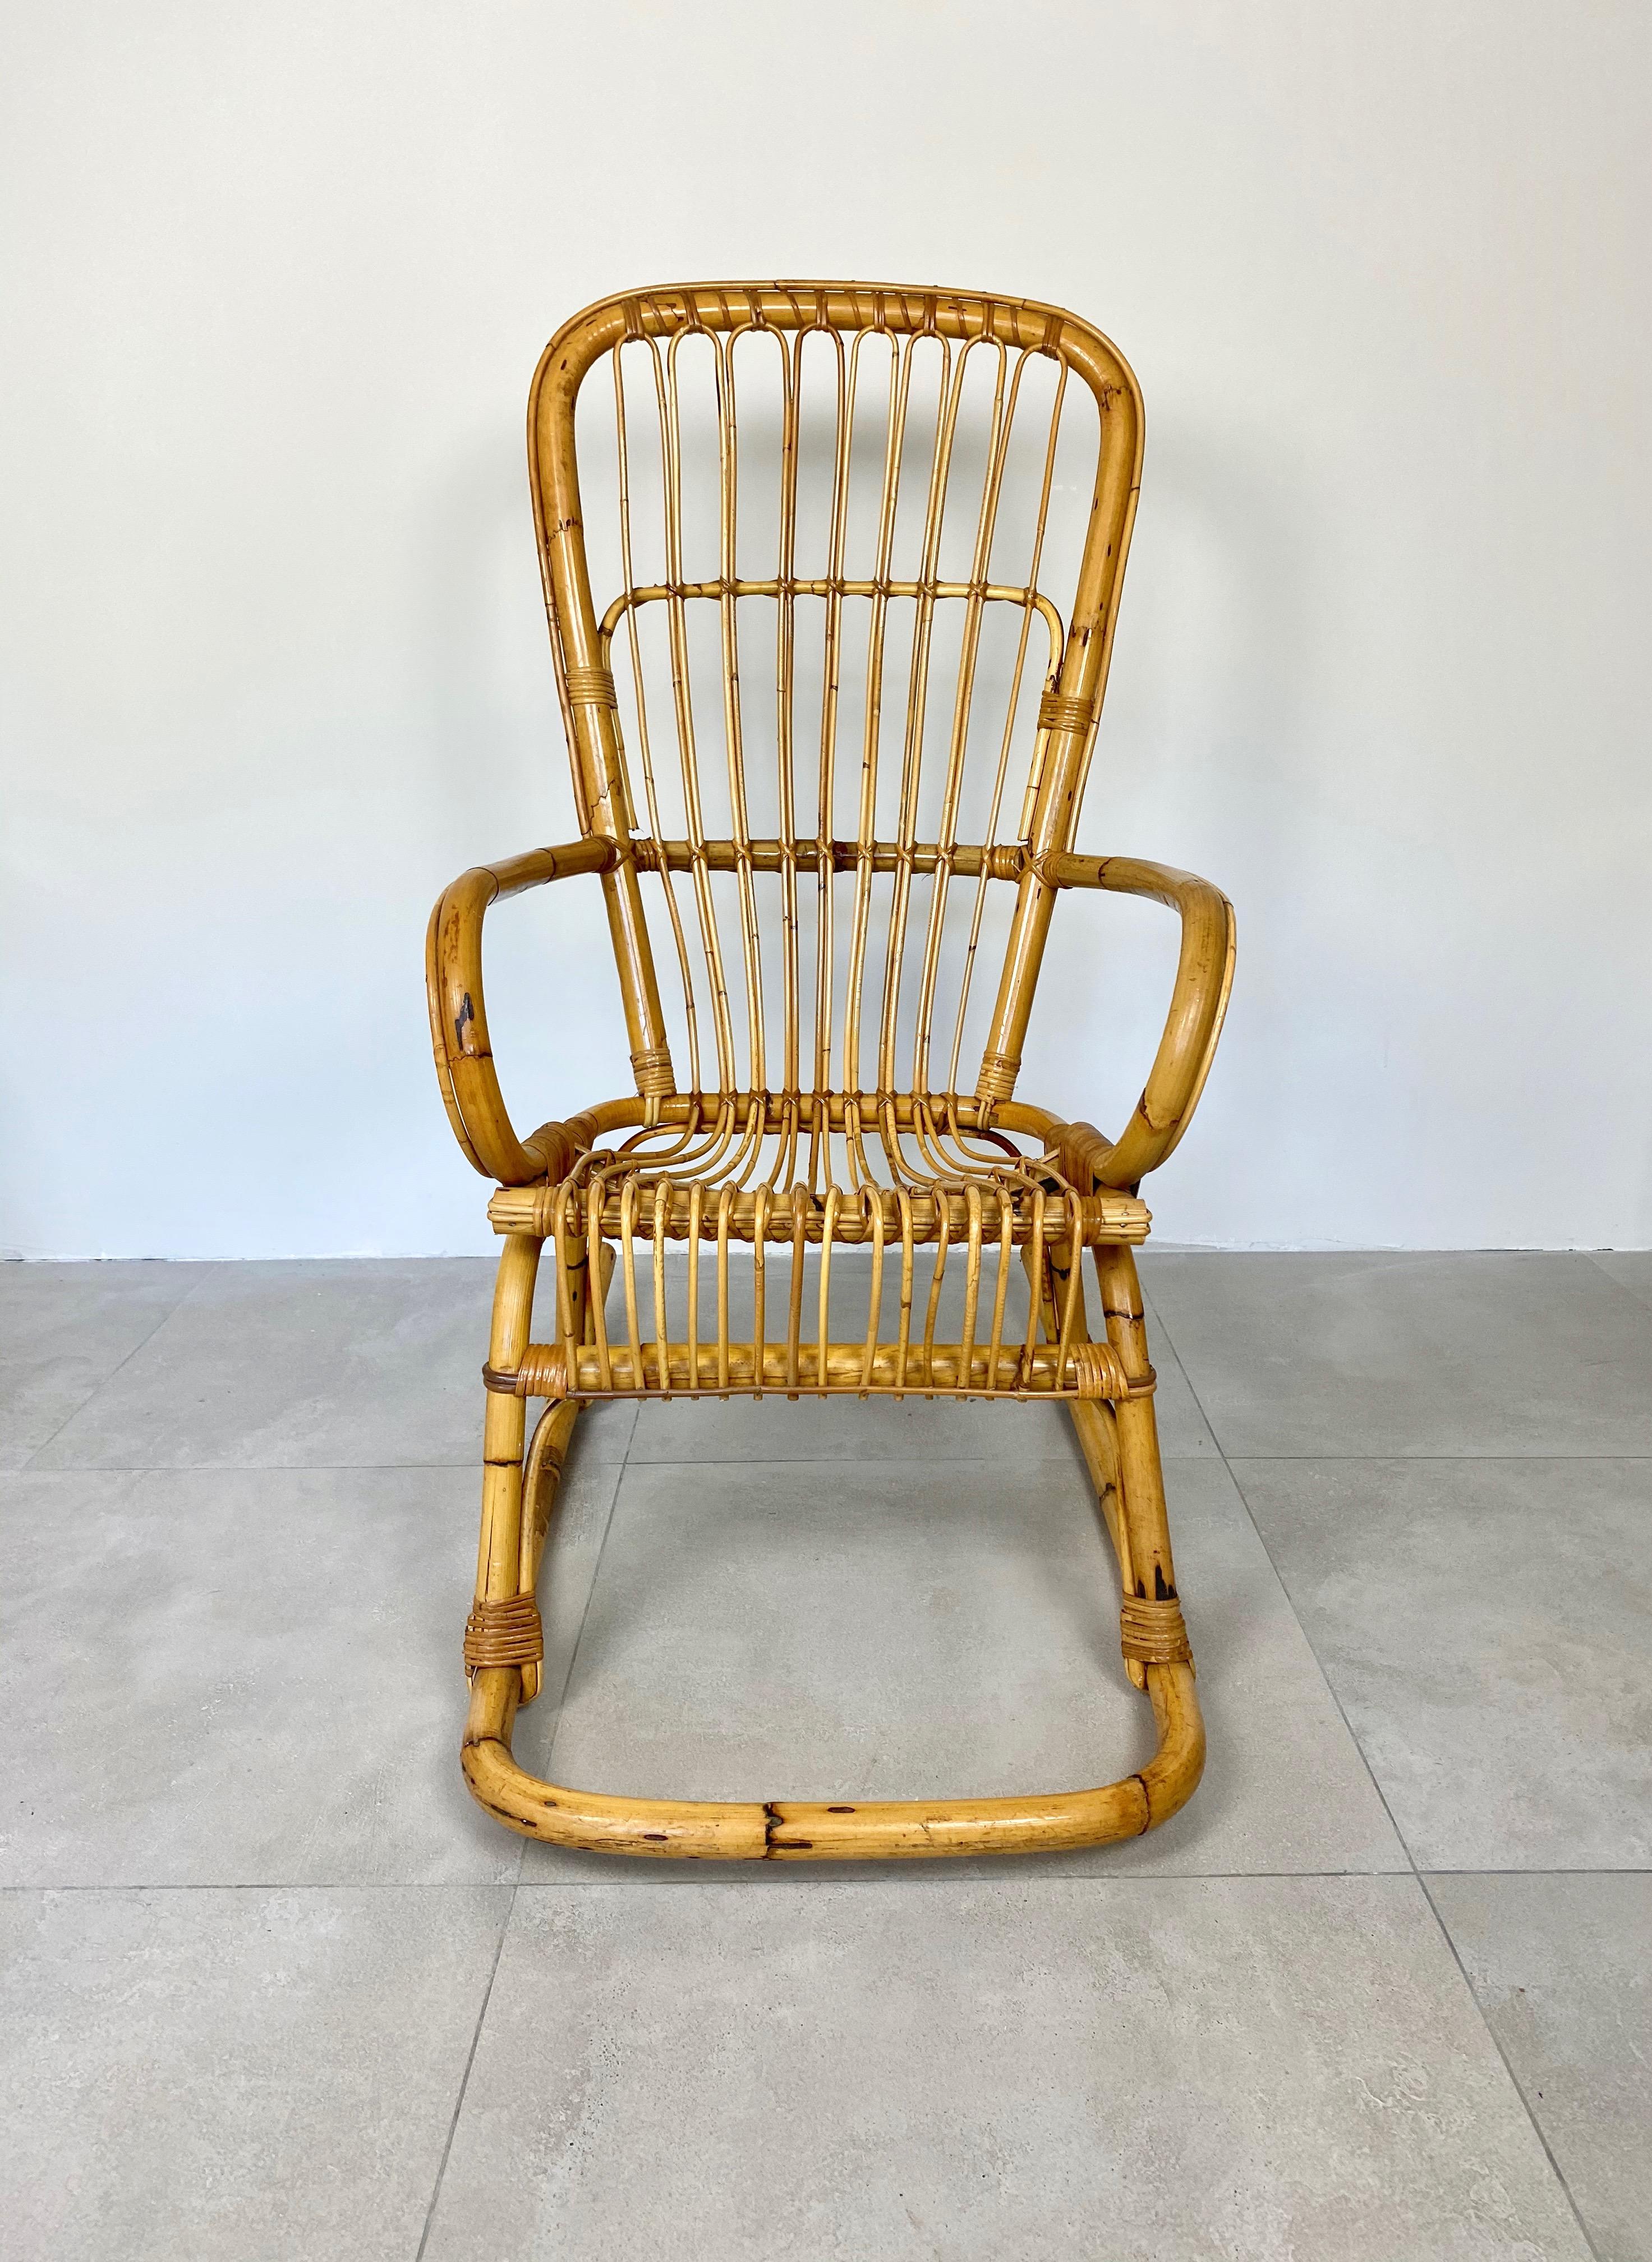 Mid-20th Century Bamboo Wicker Rocking Chair, Italy, 1960s For Sale